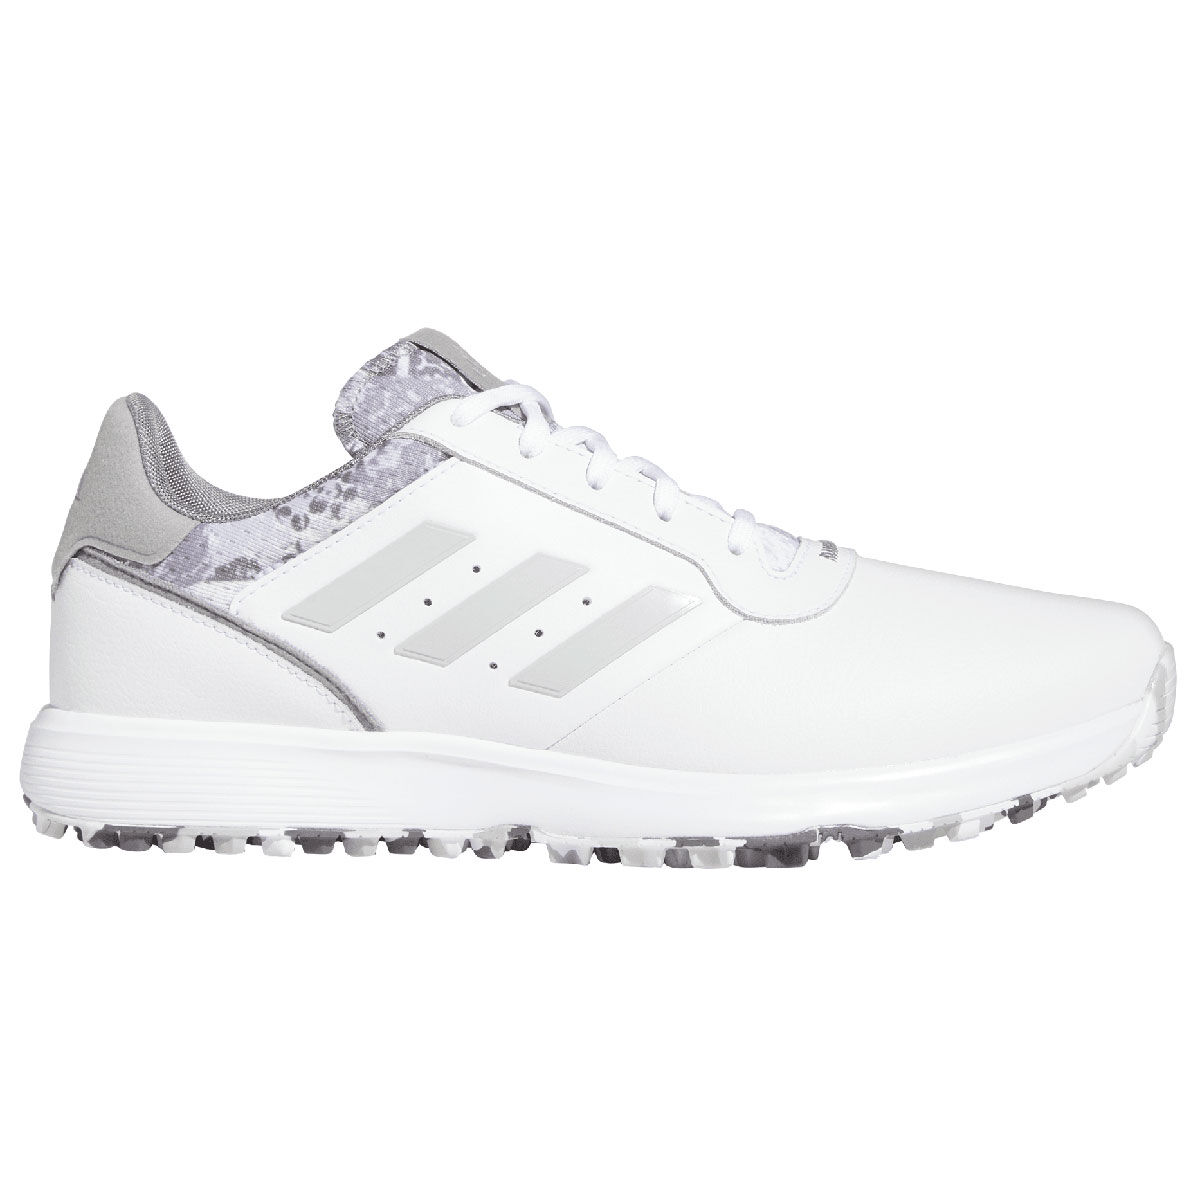 adidas Golf Mens White and Grey Lightweight S2G Leather Waterproof Spikeless Regular Fit Golf Shoes, Size: 11 | American Golf